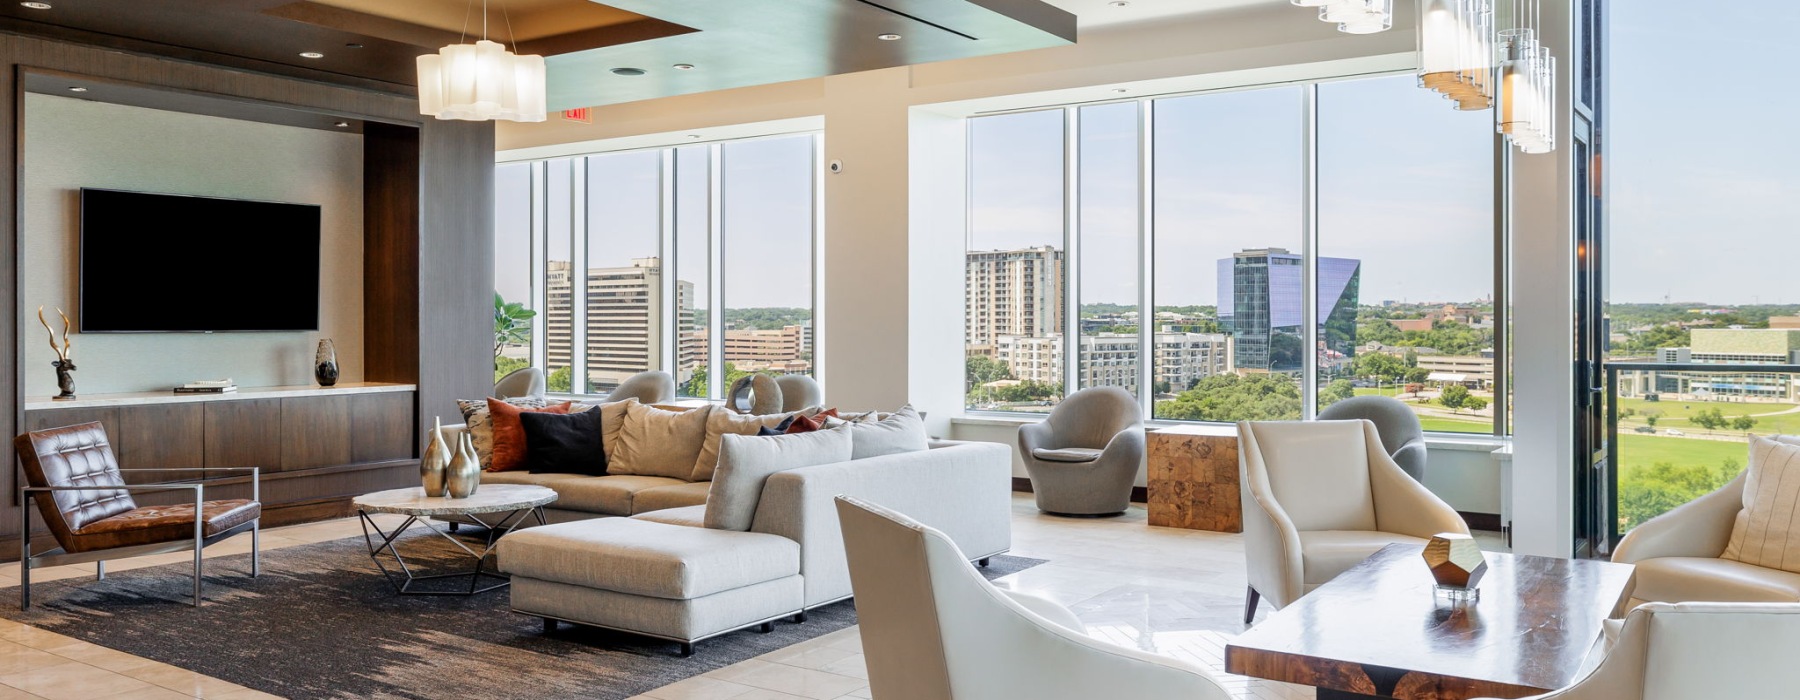 Resident lounge with couches and chairs overlooking Lady Bird Lake in Austin Texas